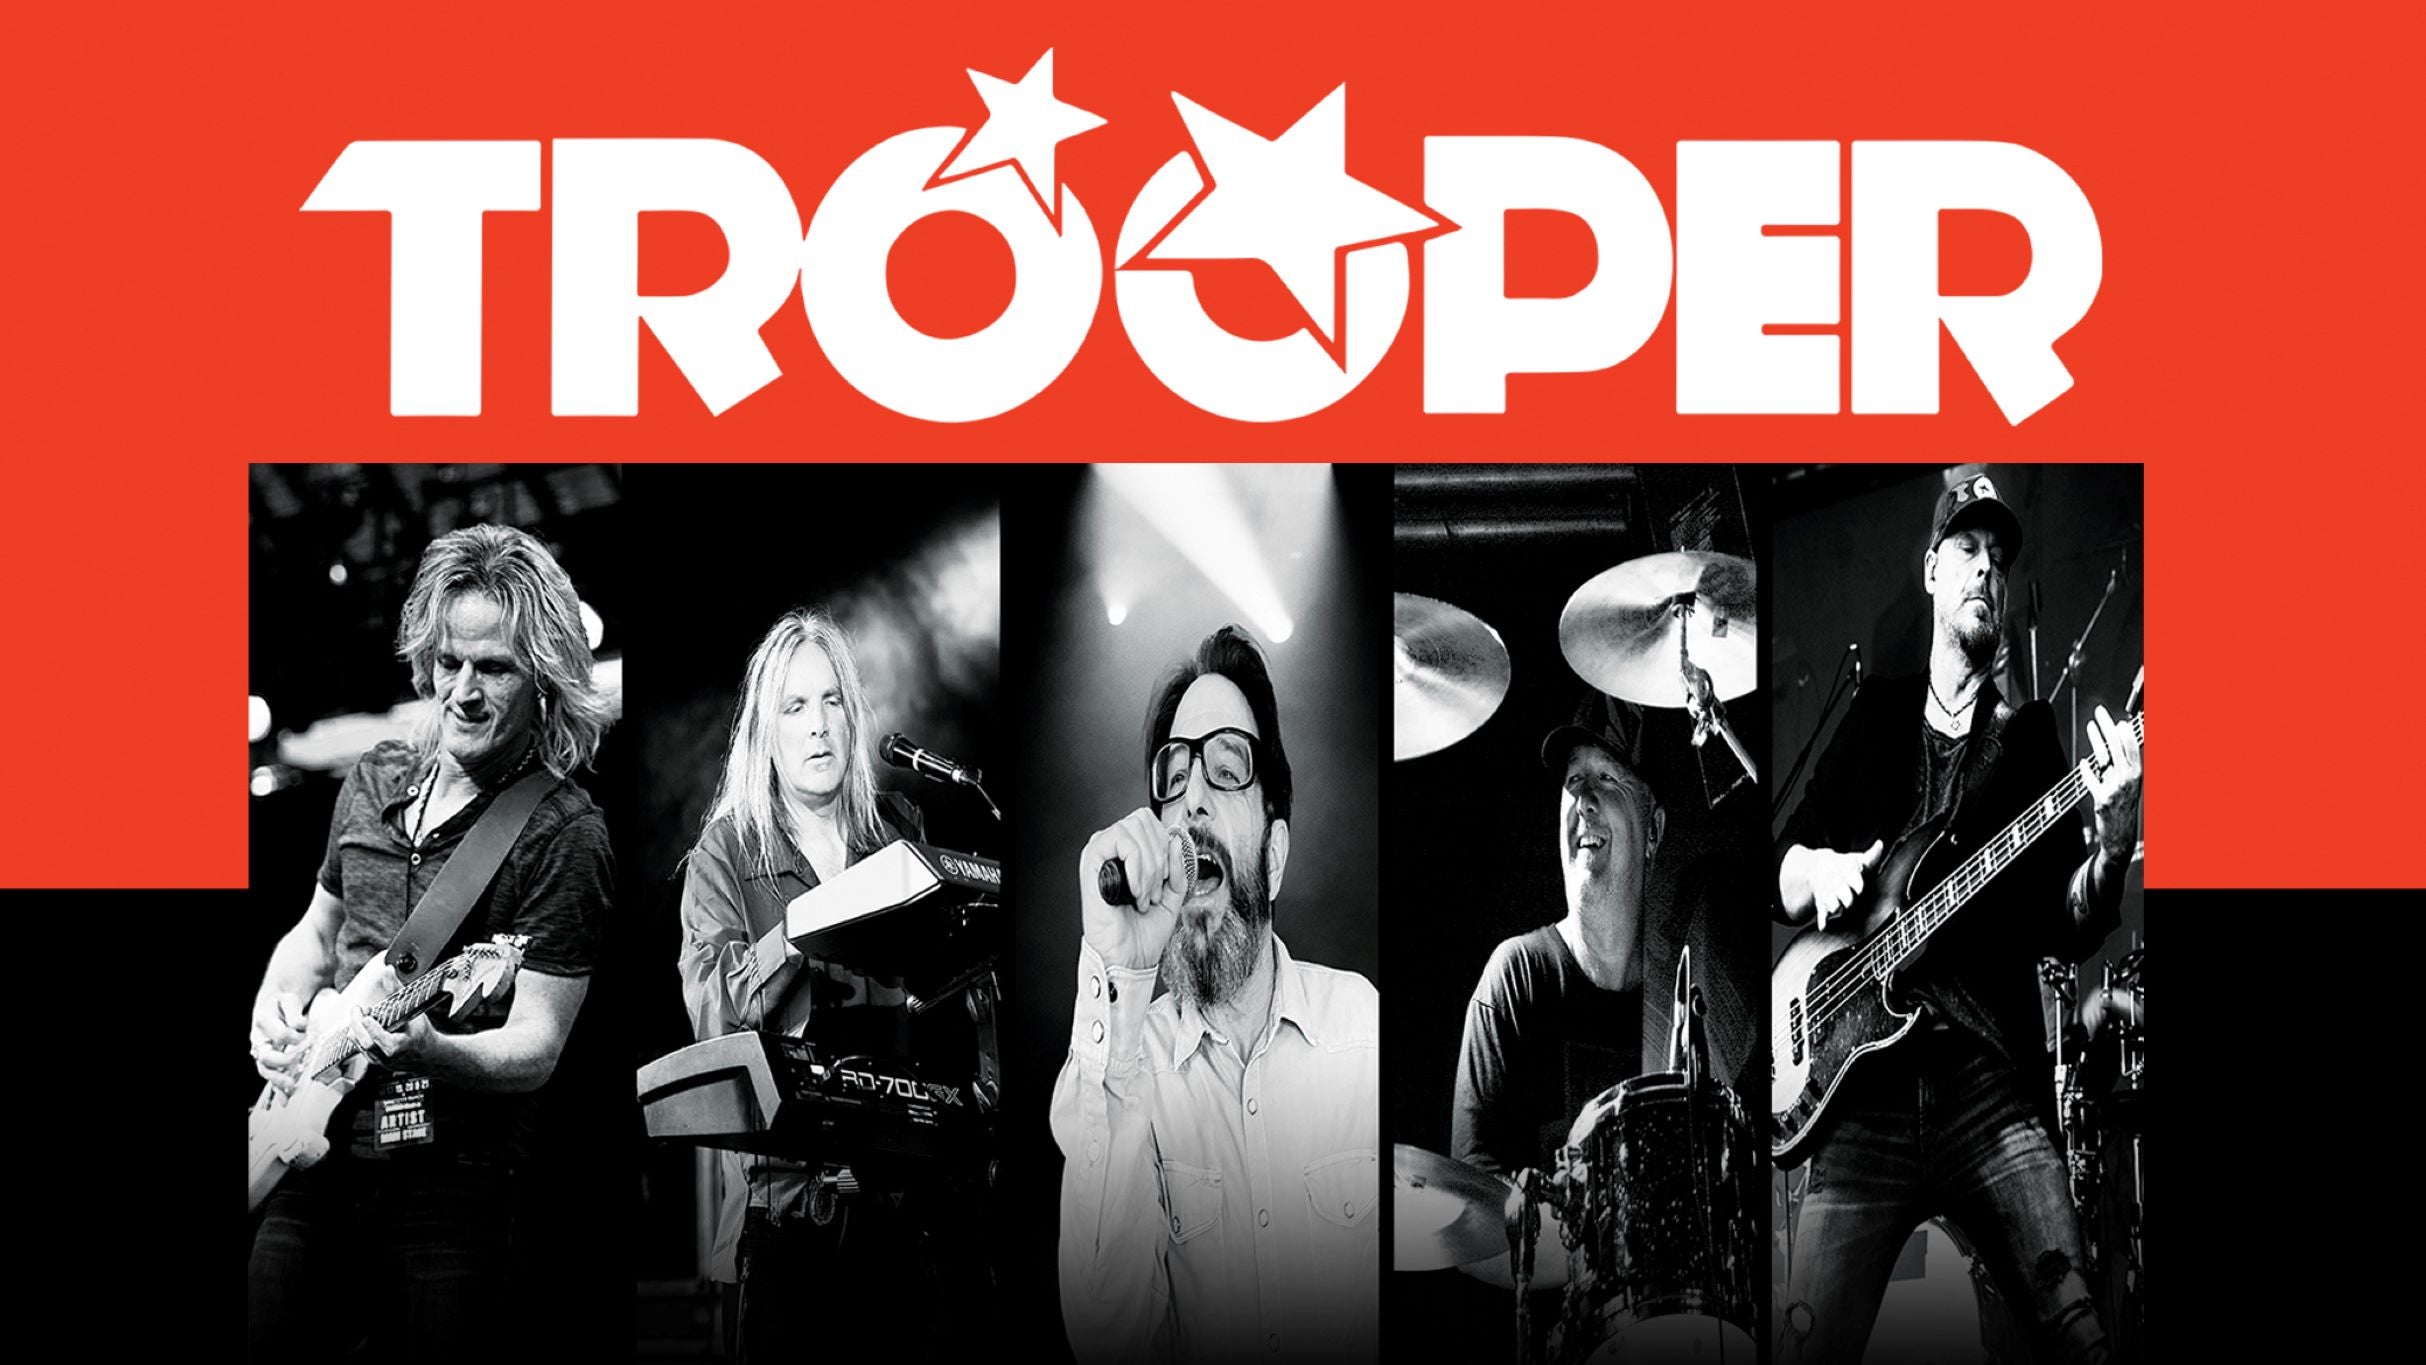 trooper band tour dates